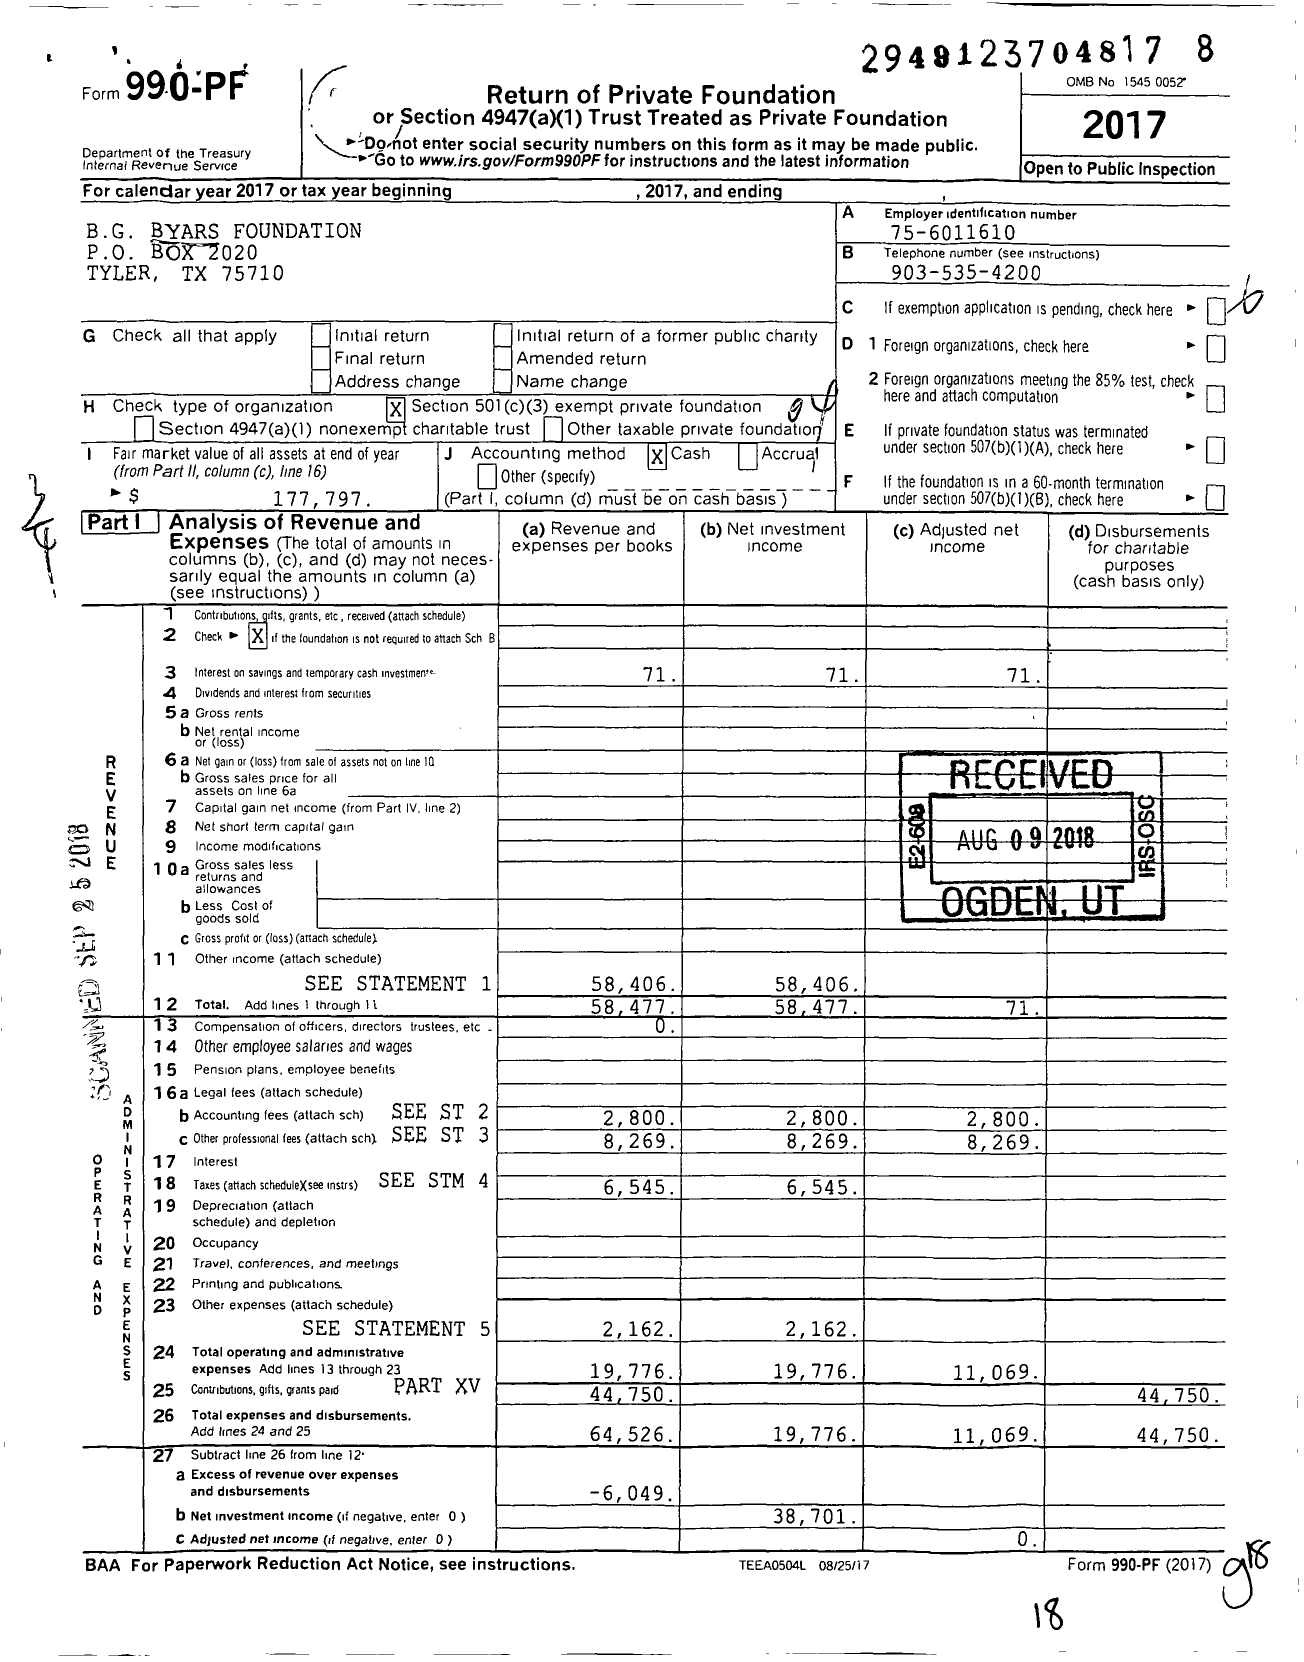 Image of first page of 2017 Form 990PF for BG Byars Foundation